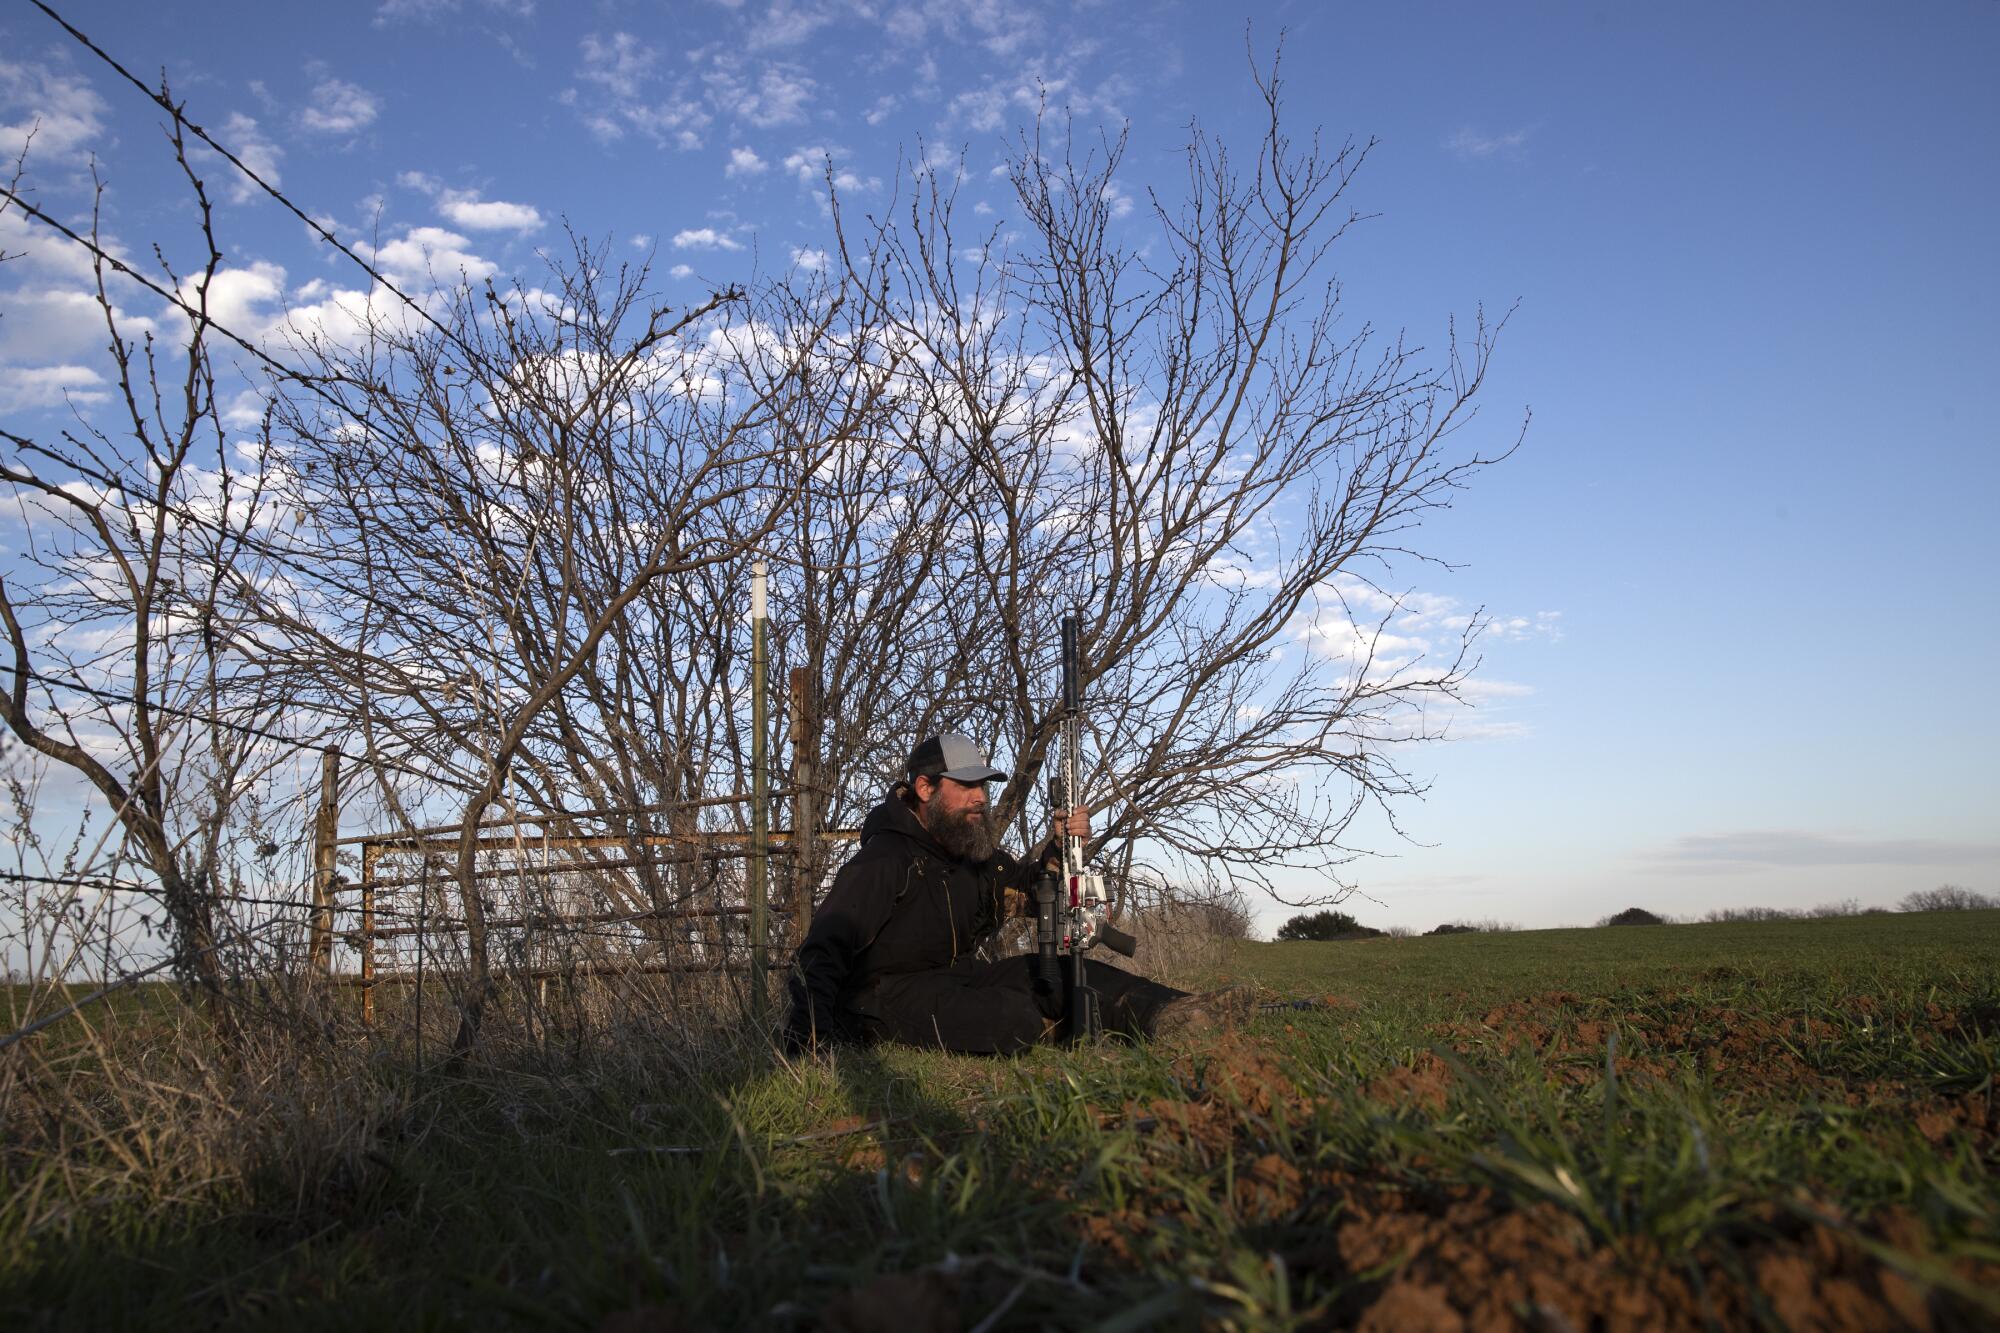 Chase Lasater sits with his rifle in a wheat field as he waits for nightfall, when wild hogs will assemble.